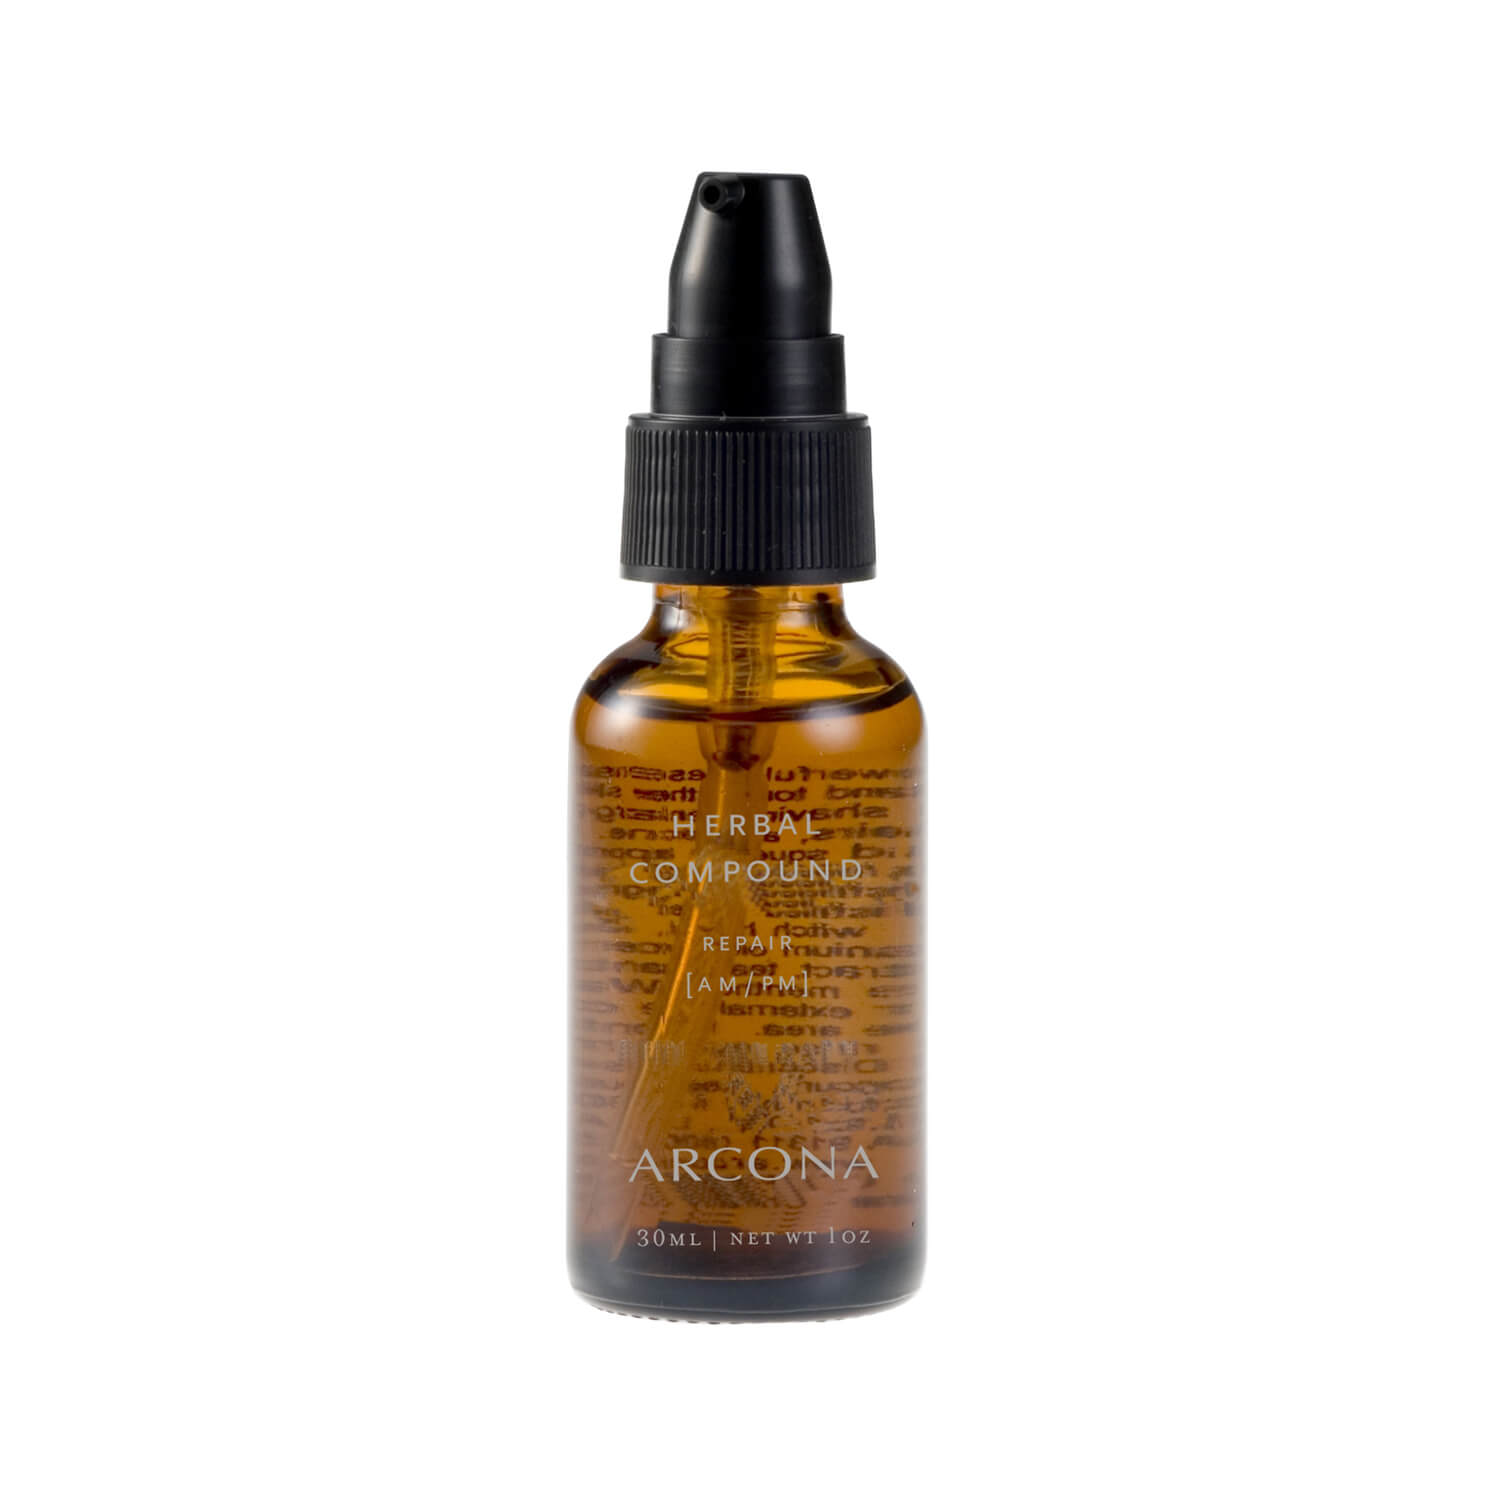 ARCONA Herbal Compound